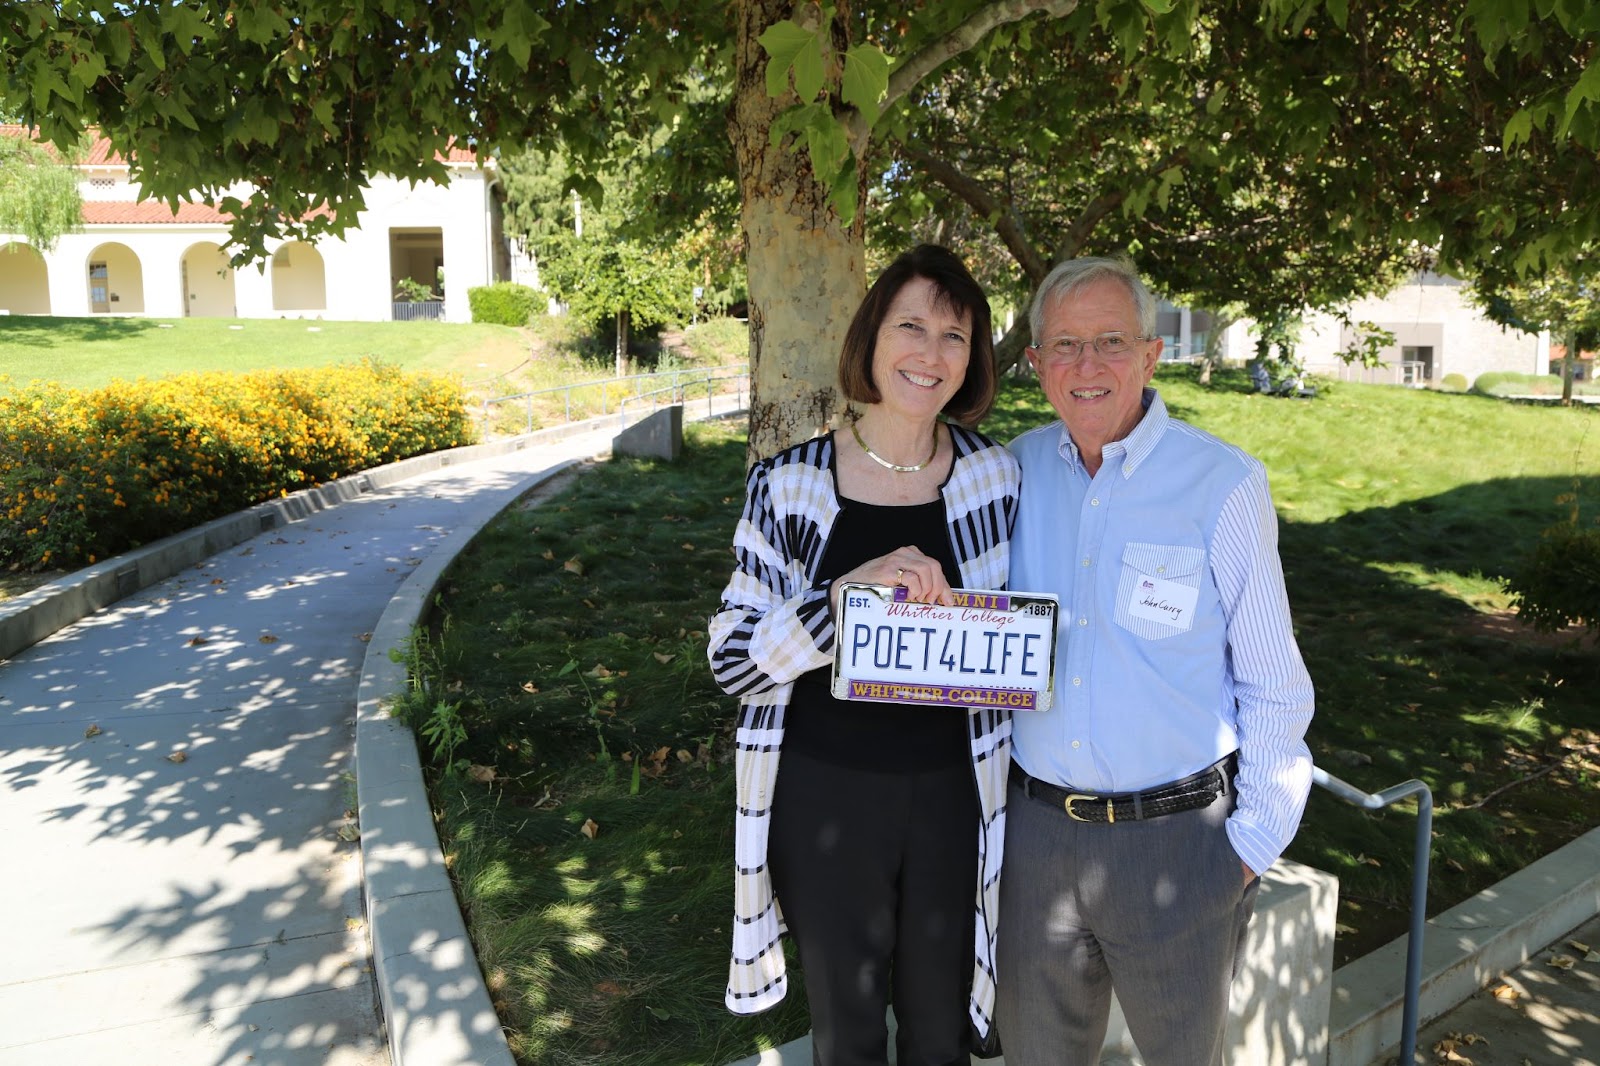 President Kristine E. Dillon ’73,  left, holds a Poet4Life license plate with her husband John Curry during the Poet4Life tour. The tour was an opportunity to for people to meet the new leadership